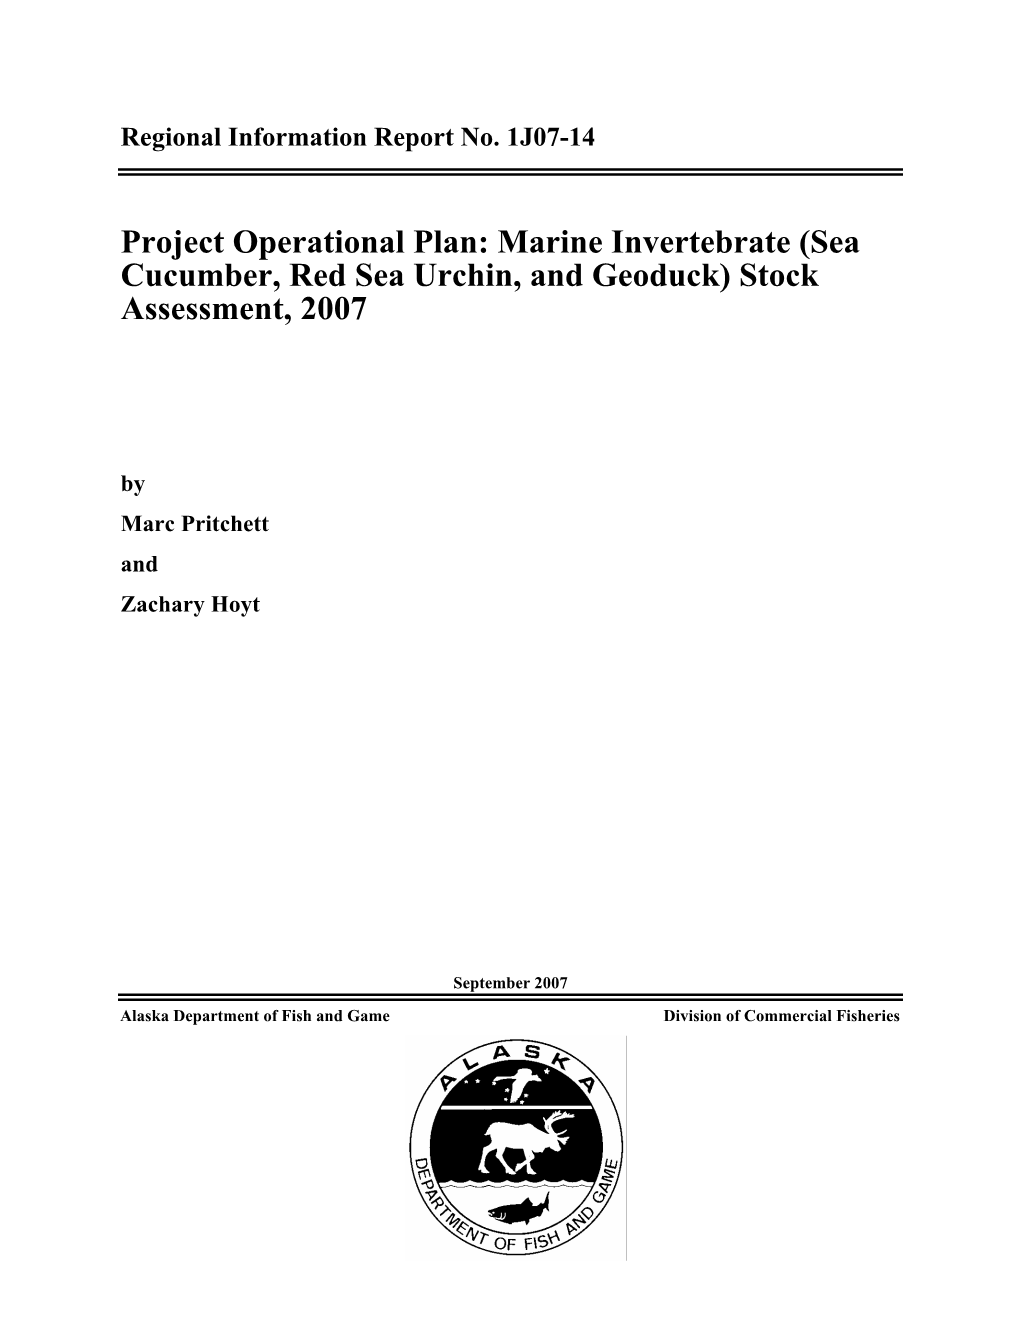 Project Operational Plan: Marine Invertebrate (Sea Cucumber, Red Sea Urchin, and Geoduck) Stock Assessment, 2007